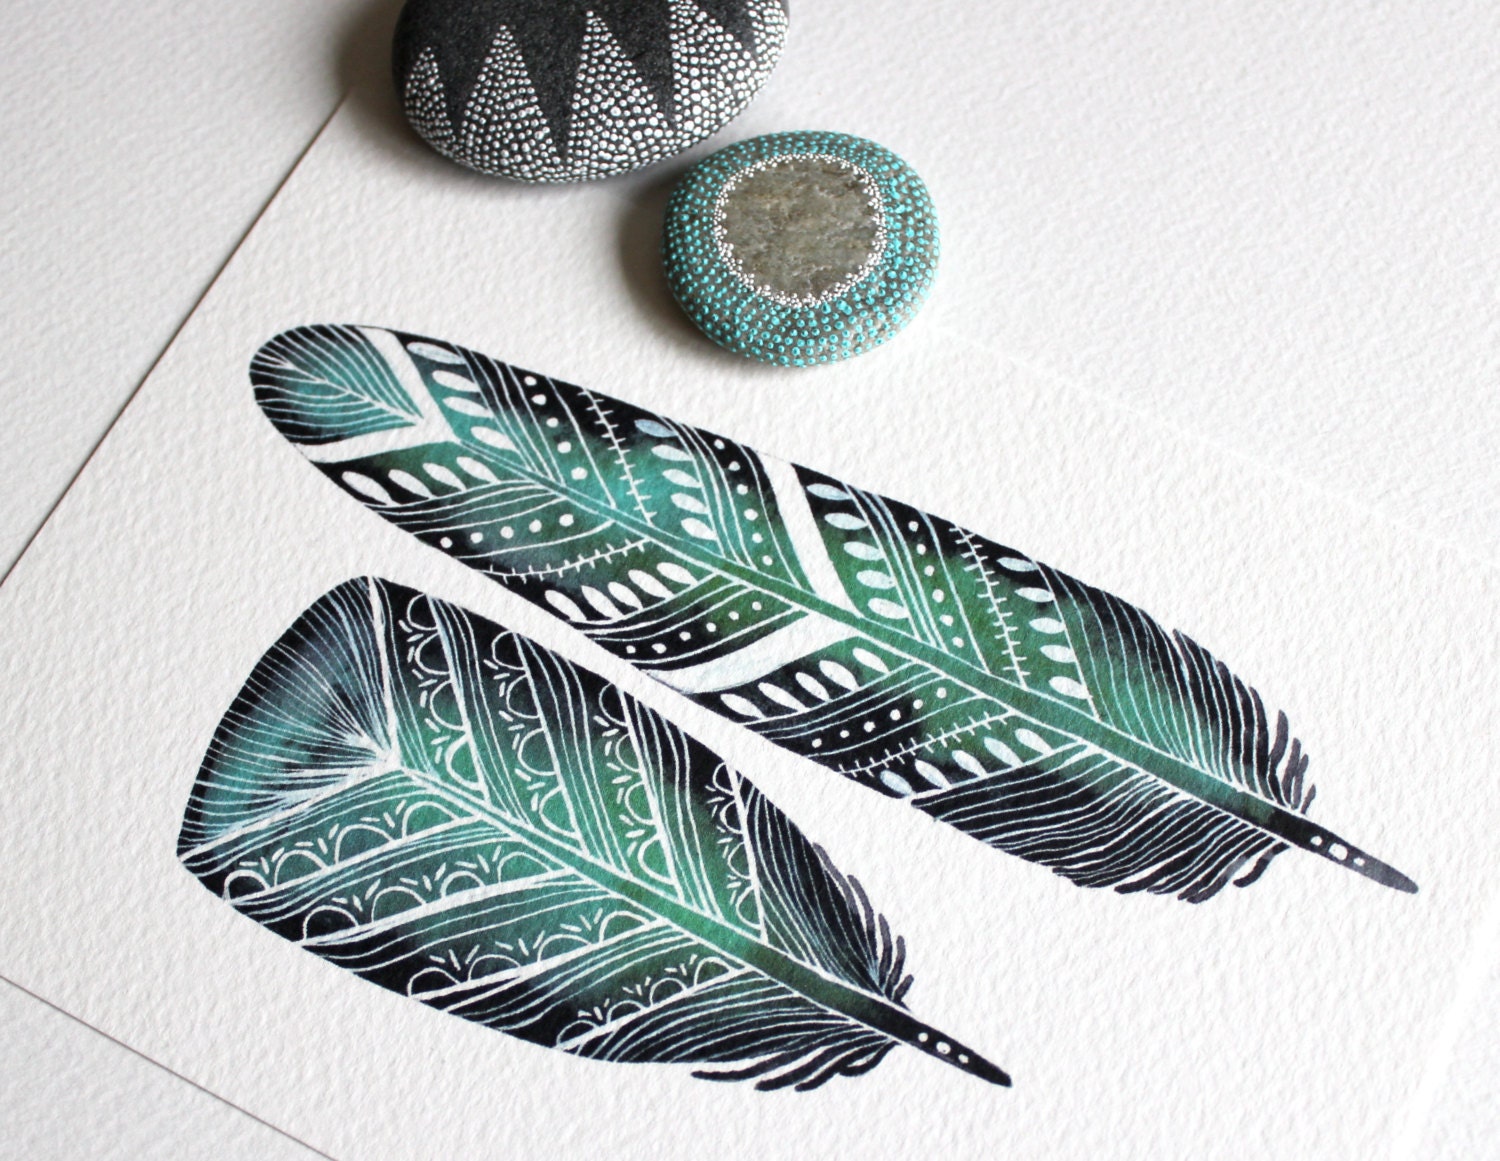 Emerald Feathers - Watercolor Painting - 8x10 Archival Print - RiverLuna